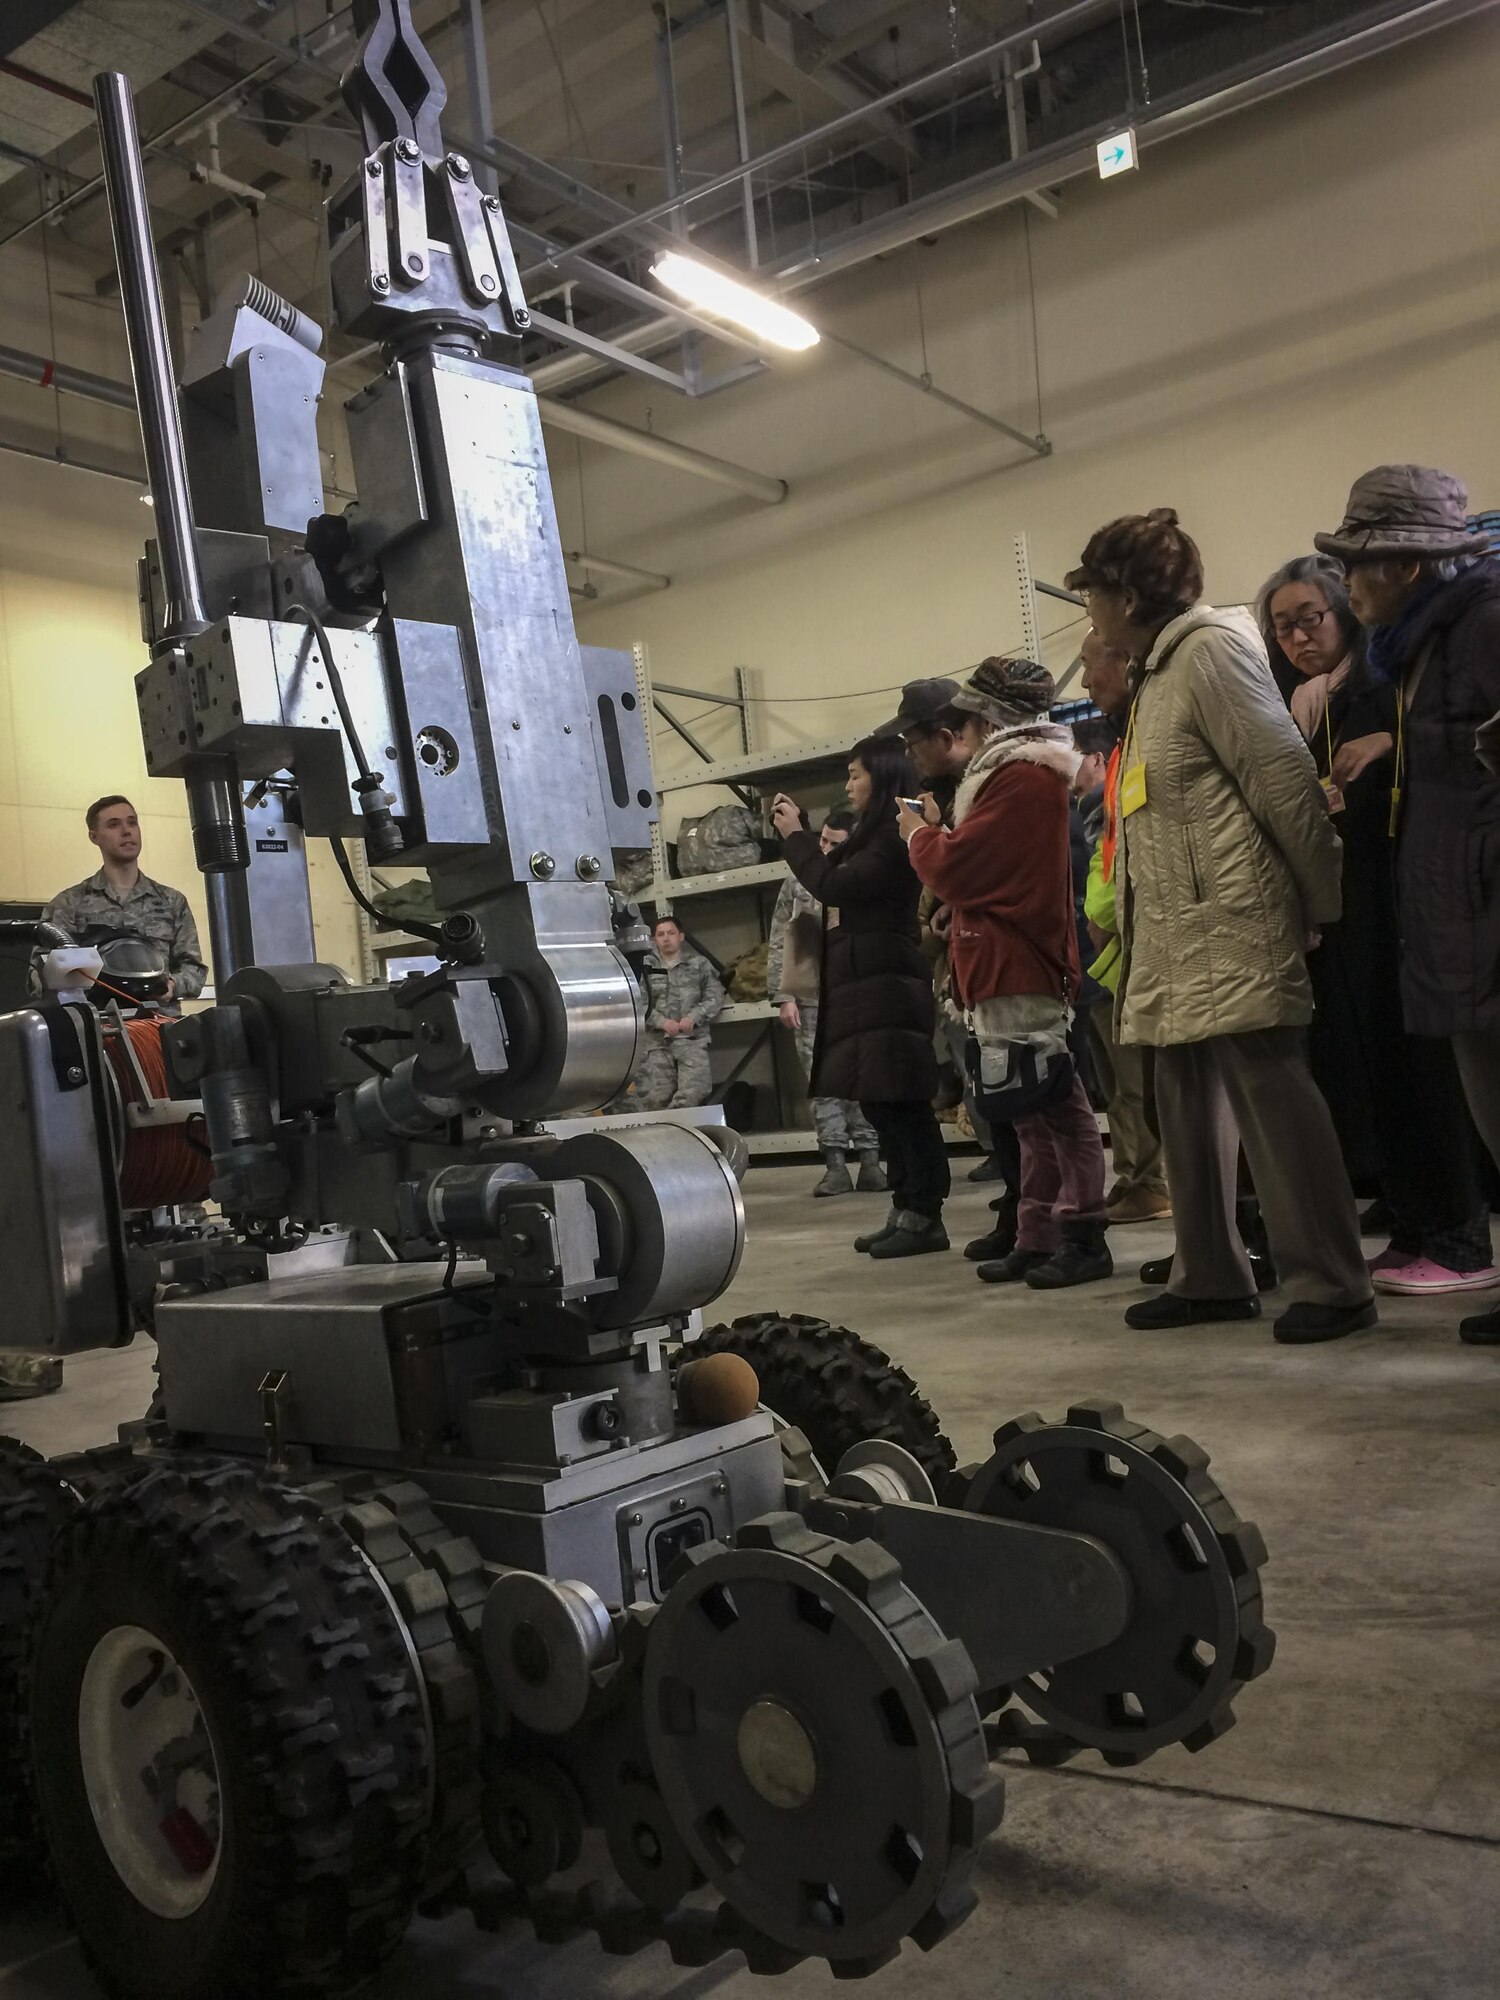 U.S. Air Force Airman 1st Class Christopher Waller, an explosive ordnance disposal apprentice with the 35th Civil Engineer Squadron, talks about the benefits associated with the unit’s bomb suit and robot with a group of Japanese nationals participating in a community relations tour at Misawa Air Base, Japan, Jan. 20, 2017. EOD Airmen are trained to detect, disarm, detonate and dispose of explosive threats all over the world. They are assigned some of the most dangerous missions and perform technically de-manding tasks in diverse environments worldwide. (U.S. Air Force photo by Staff Sgt. Benjamin W. Stratton)